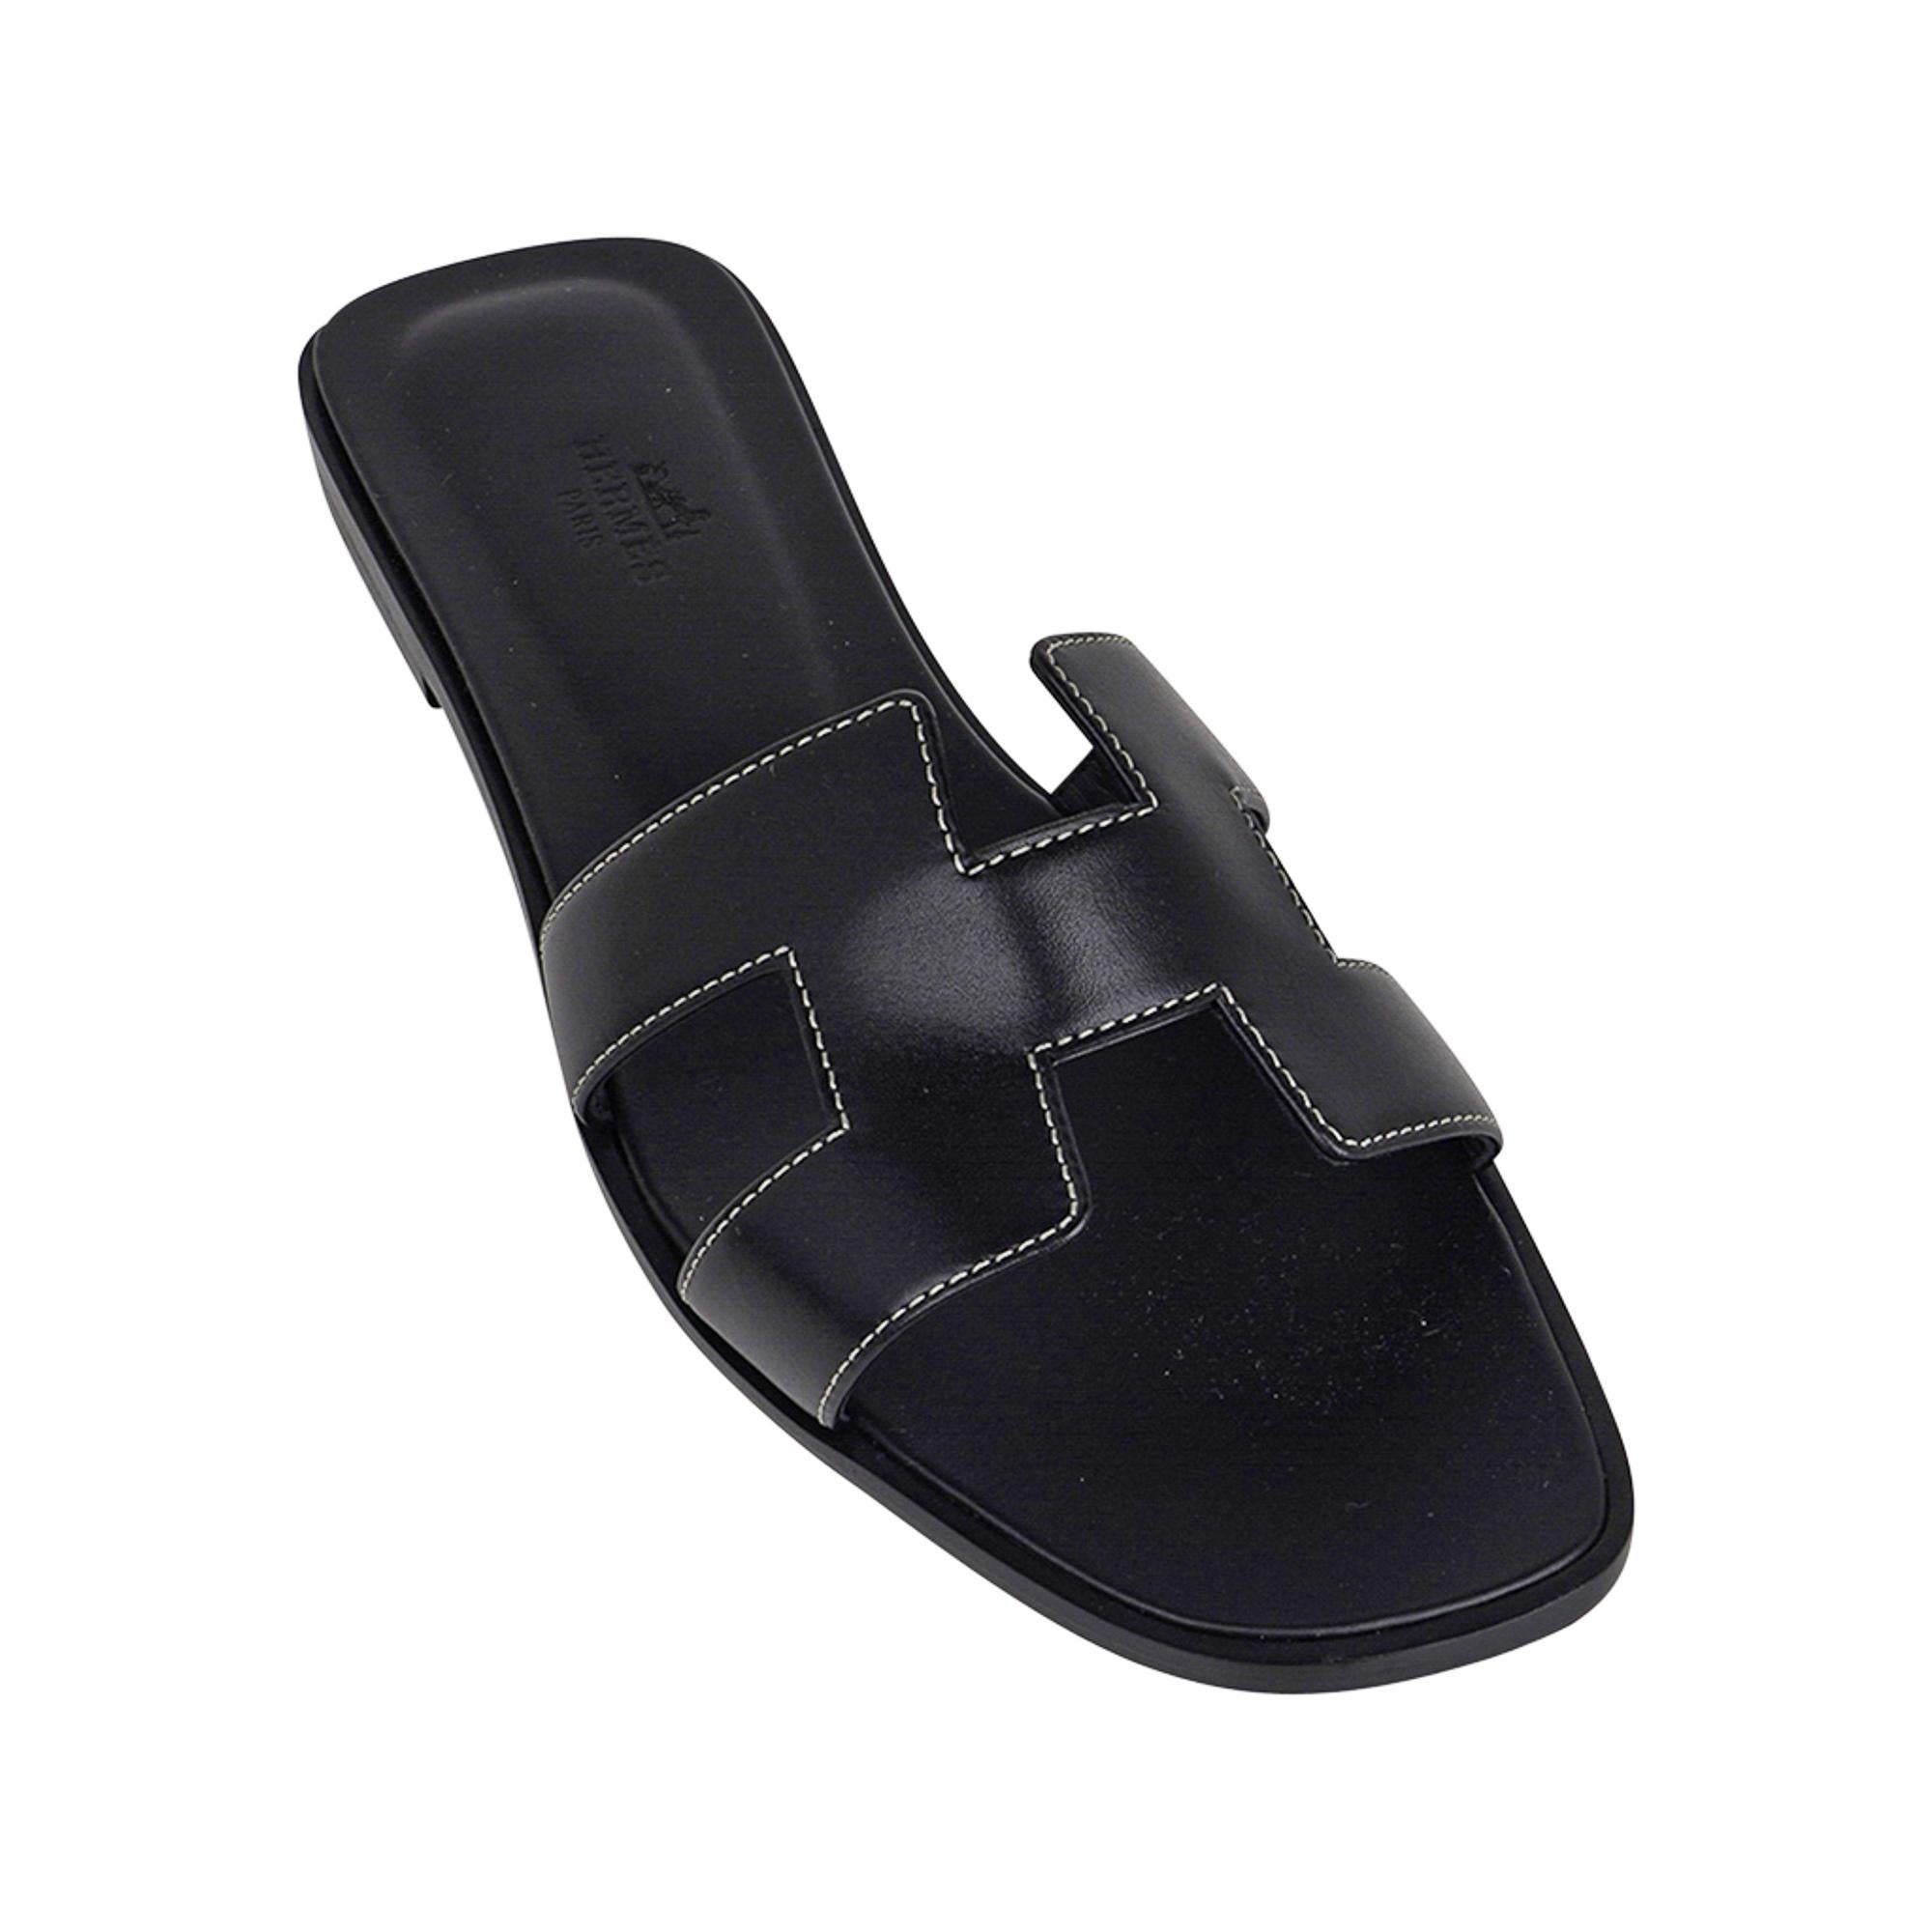 Mightychic offers a guaranteed authentic Hermes Oran exquisite Black calfskin slide.
The iconic bone top stitched H cutout over the top of the foot in sublime calfskin.
Black embossed calfskin insole. 
Wood heel with leather sole. 
Comes with